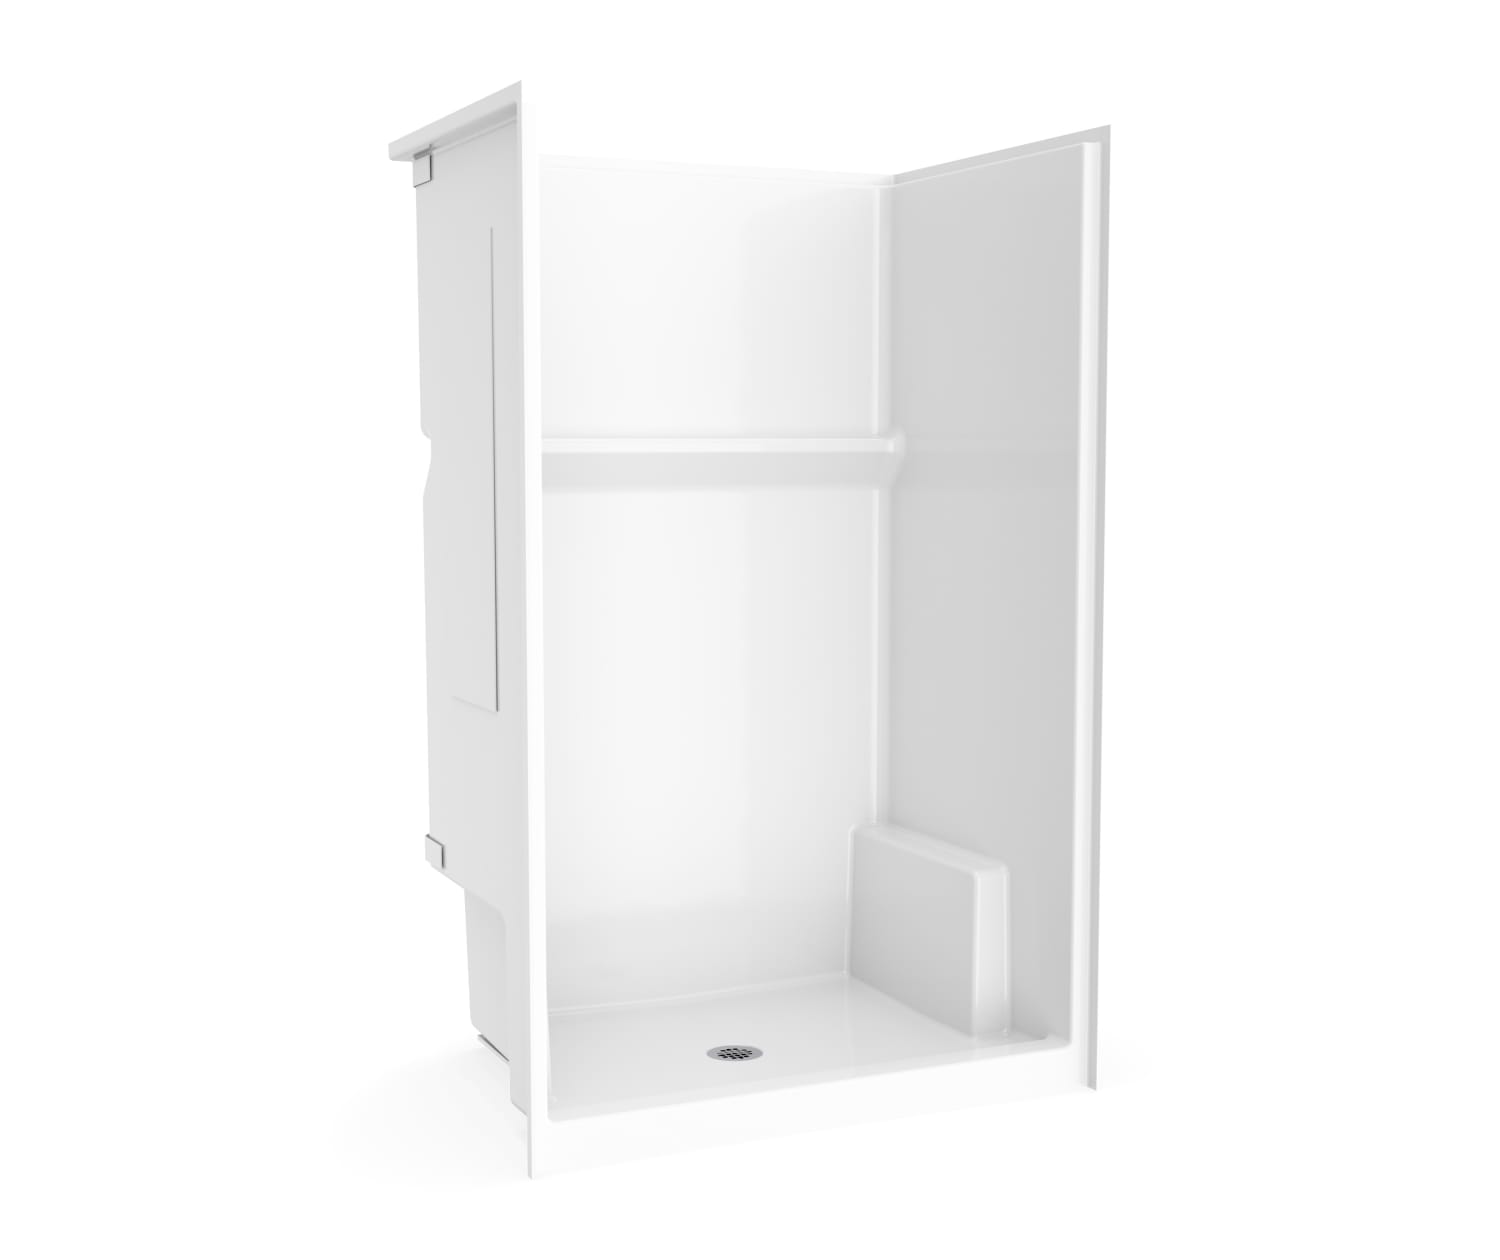 Icon SH 4834 AFR Acrylx Alcove Center Drain One-piece Shower in 